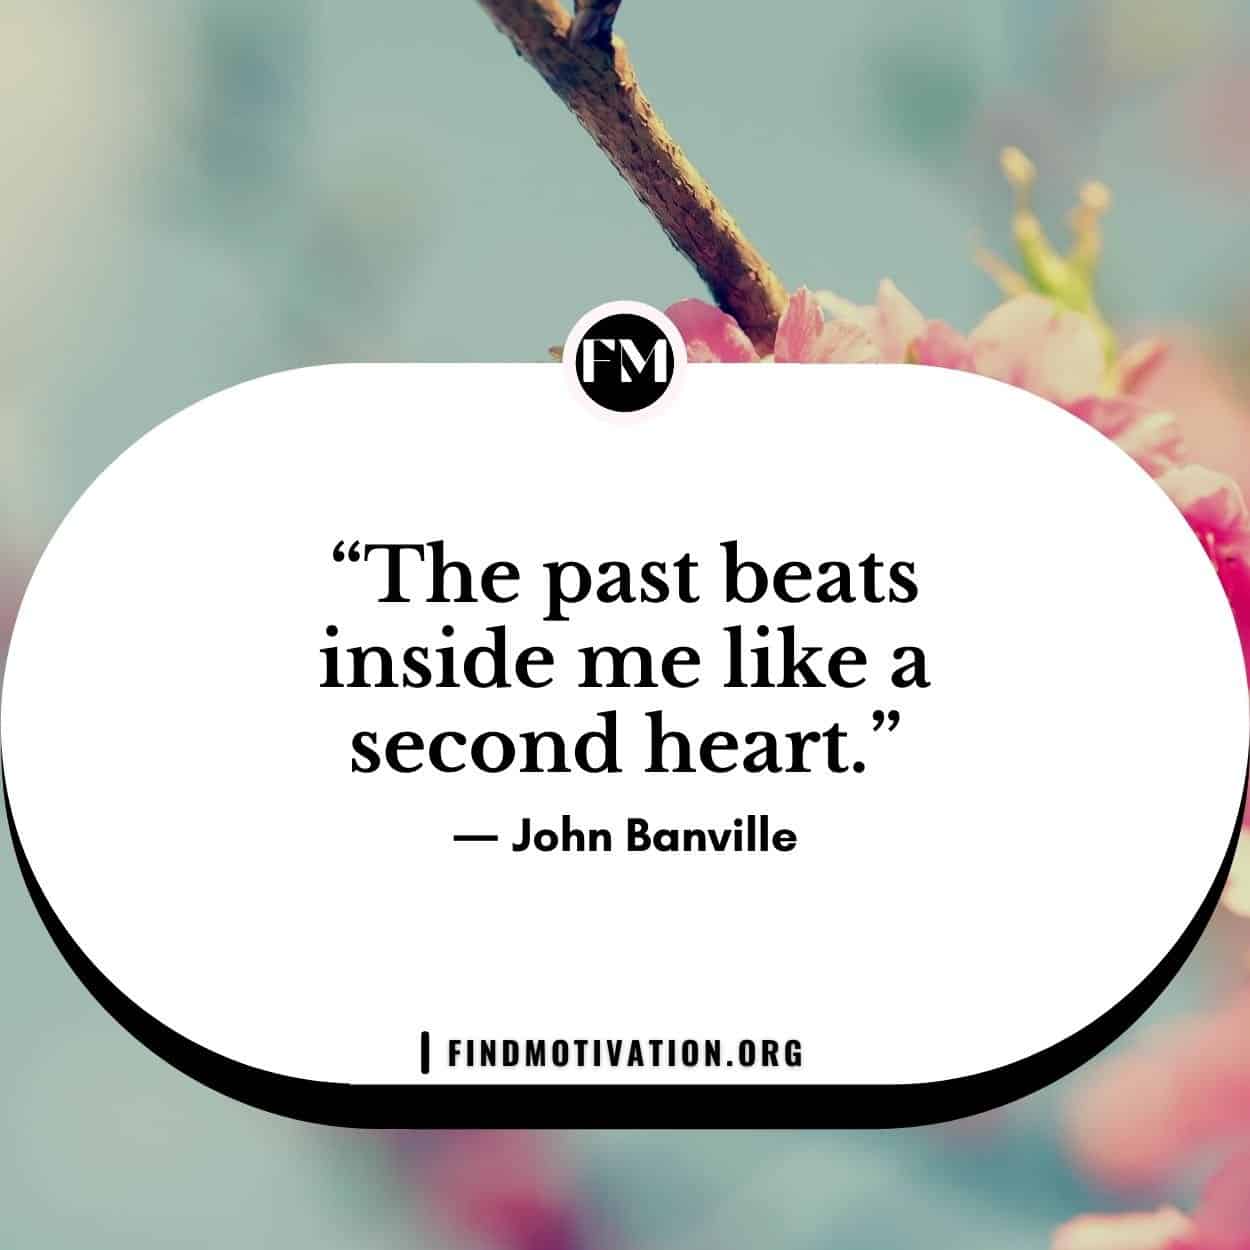 Healing The Past Quotes to forget the mistakes of the past